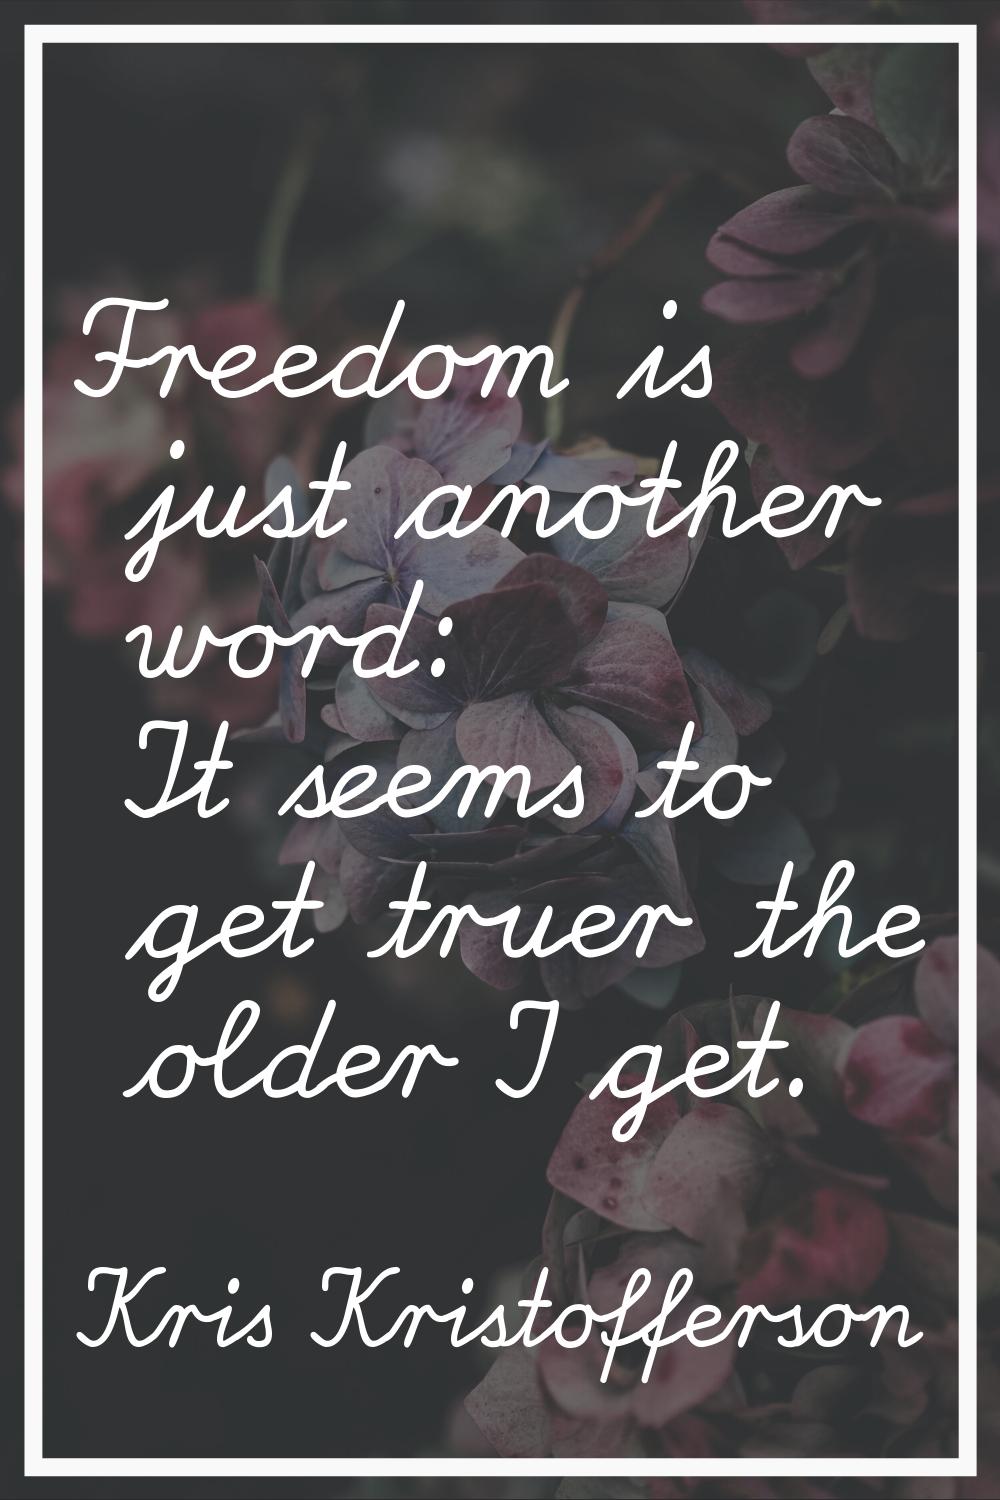 Freedom is just another word: It seems to get truer the older I get.